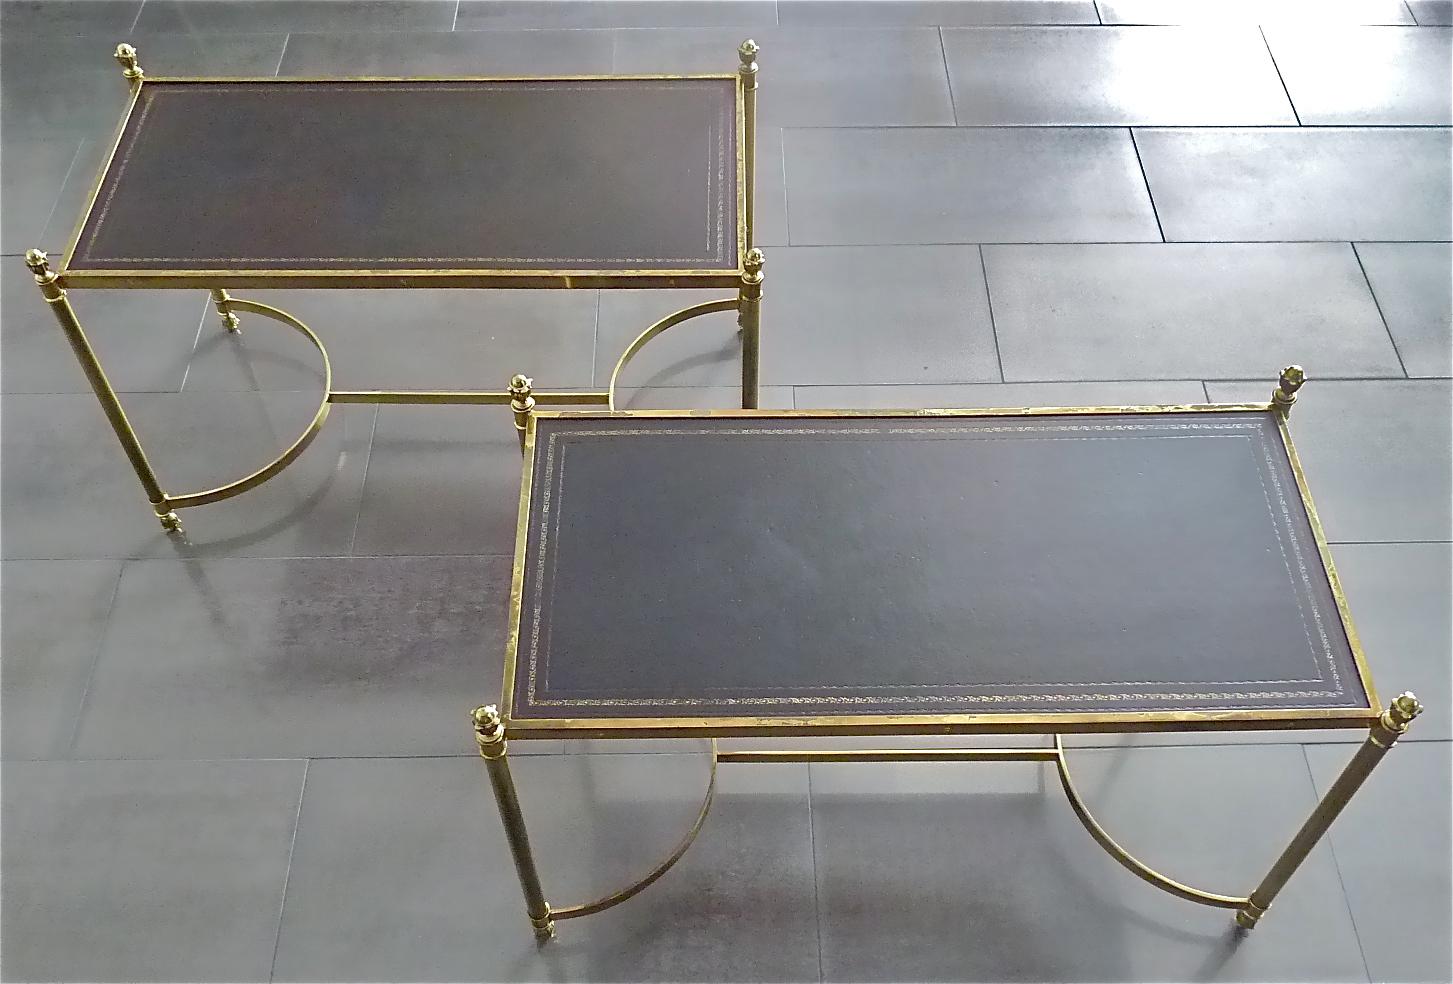 Rare and large pair of elegant rectangular French Maison Jansen attribution Mid 20th Century gilt patinated brass side, sofa, couch or end tables with original embossed brown leather tops with faint red golden leaf band ornament, Paris, France circa